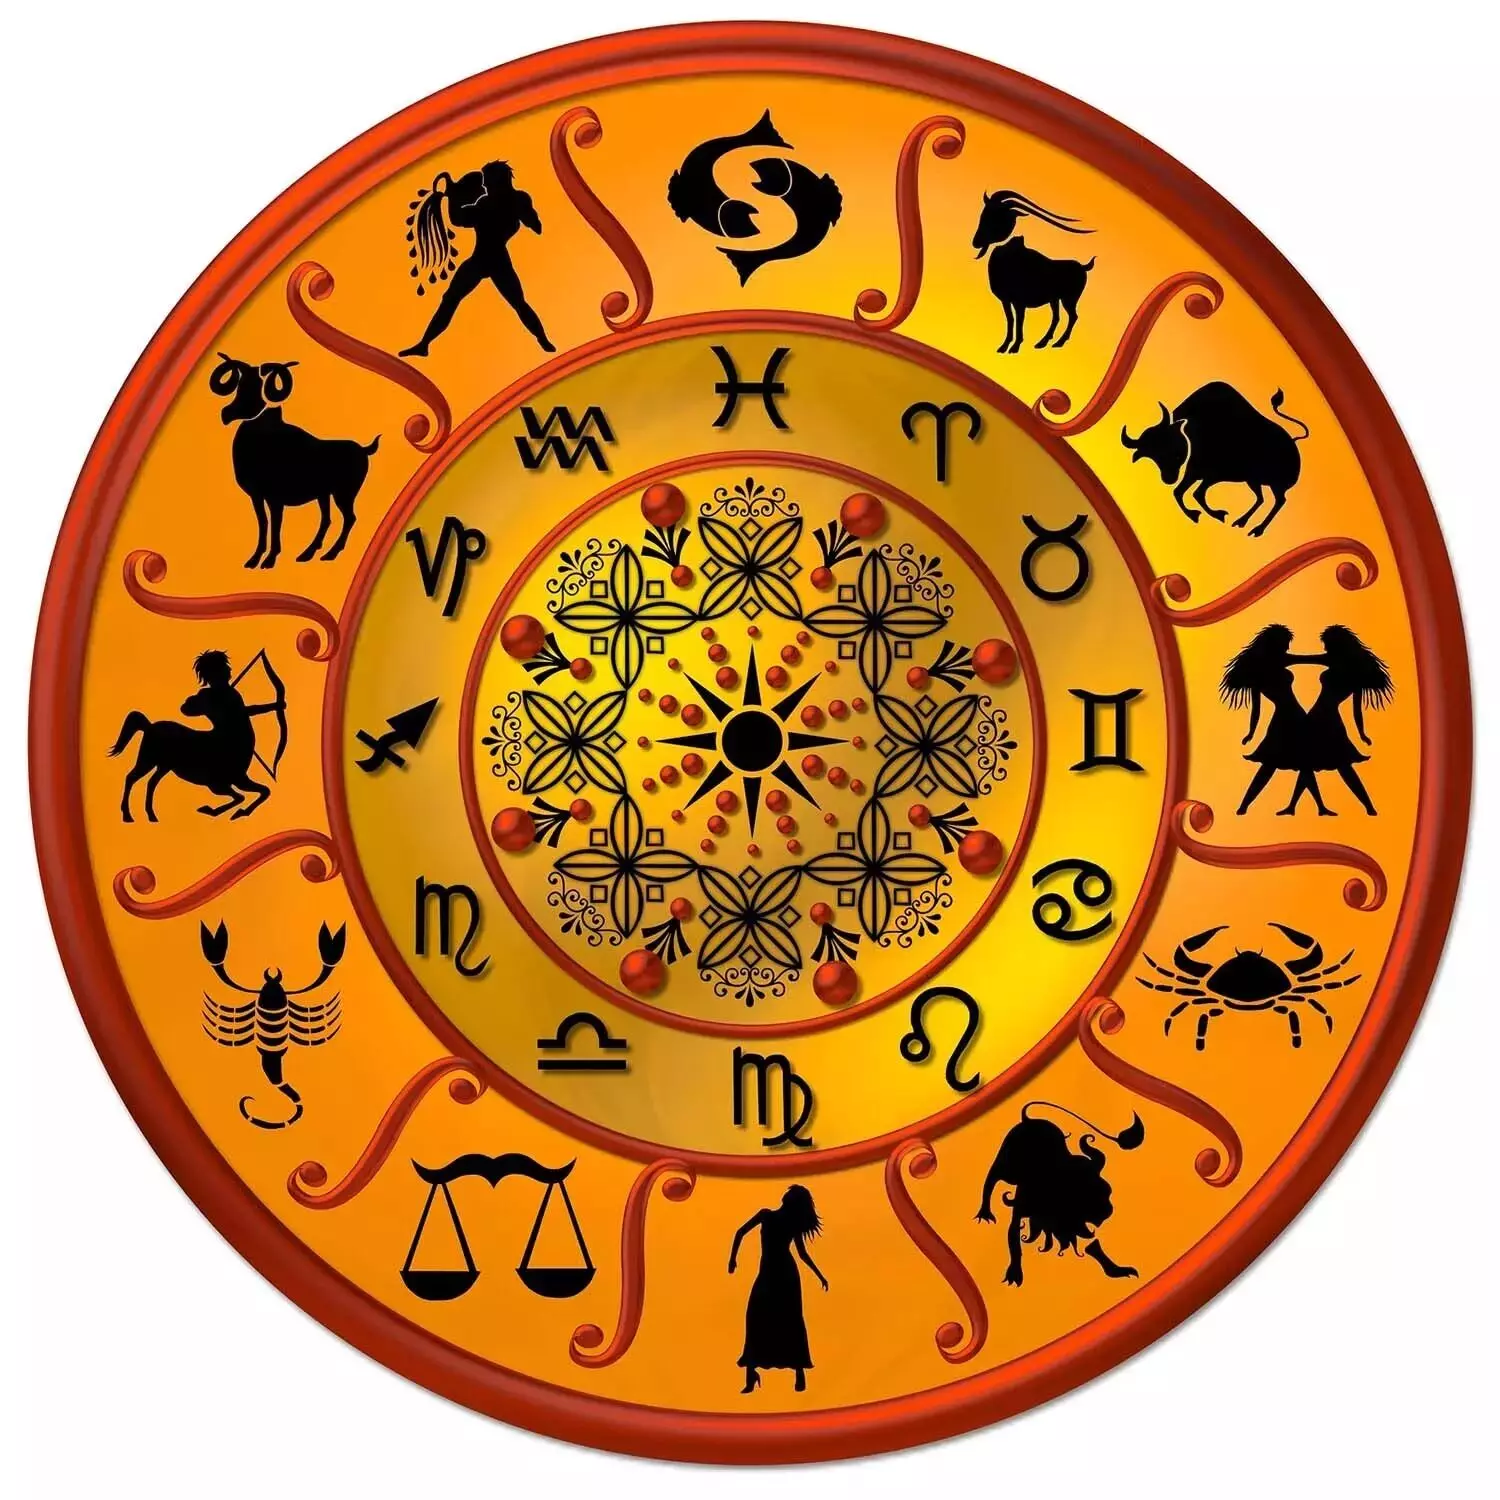 07  October  – Know your todays horoscope